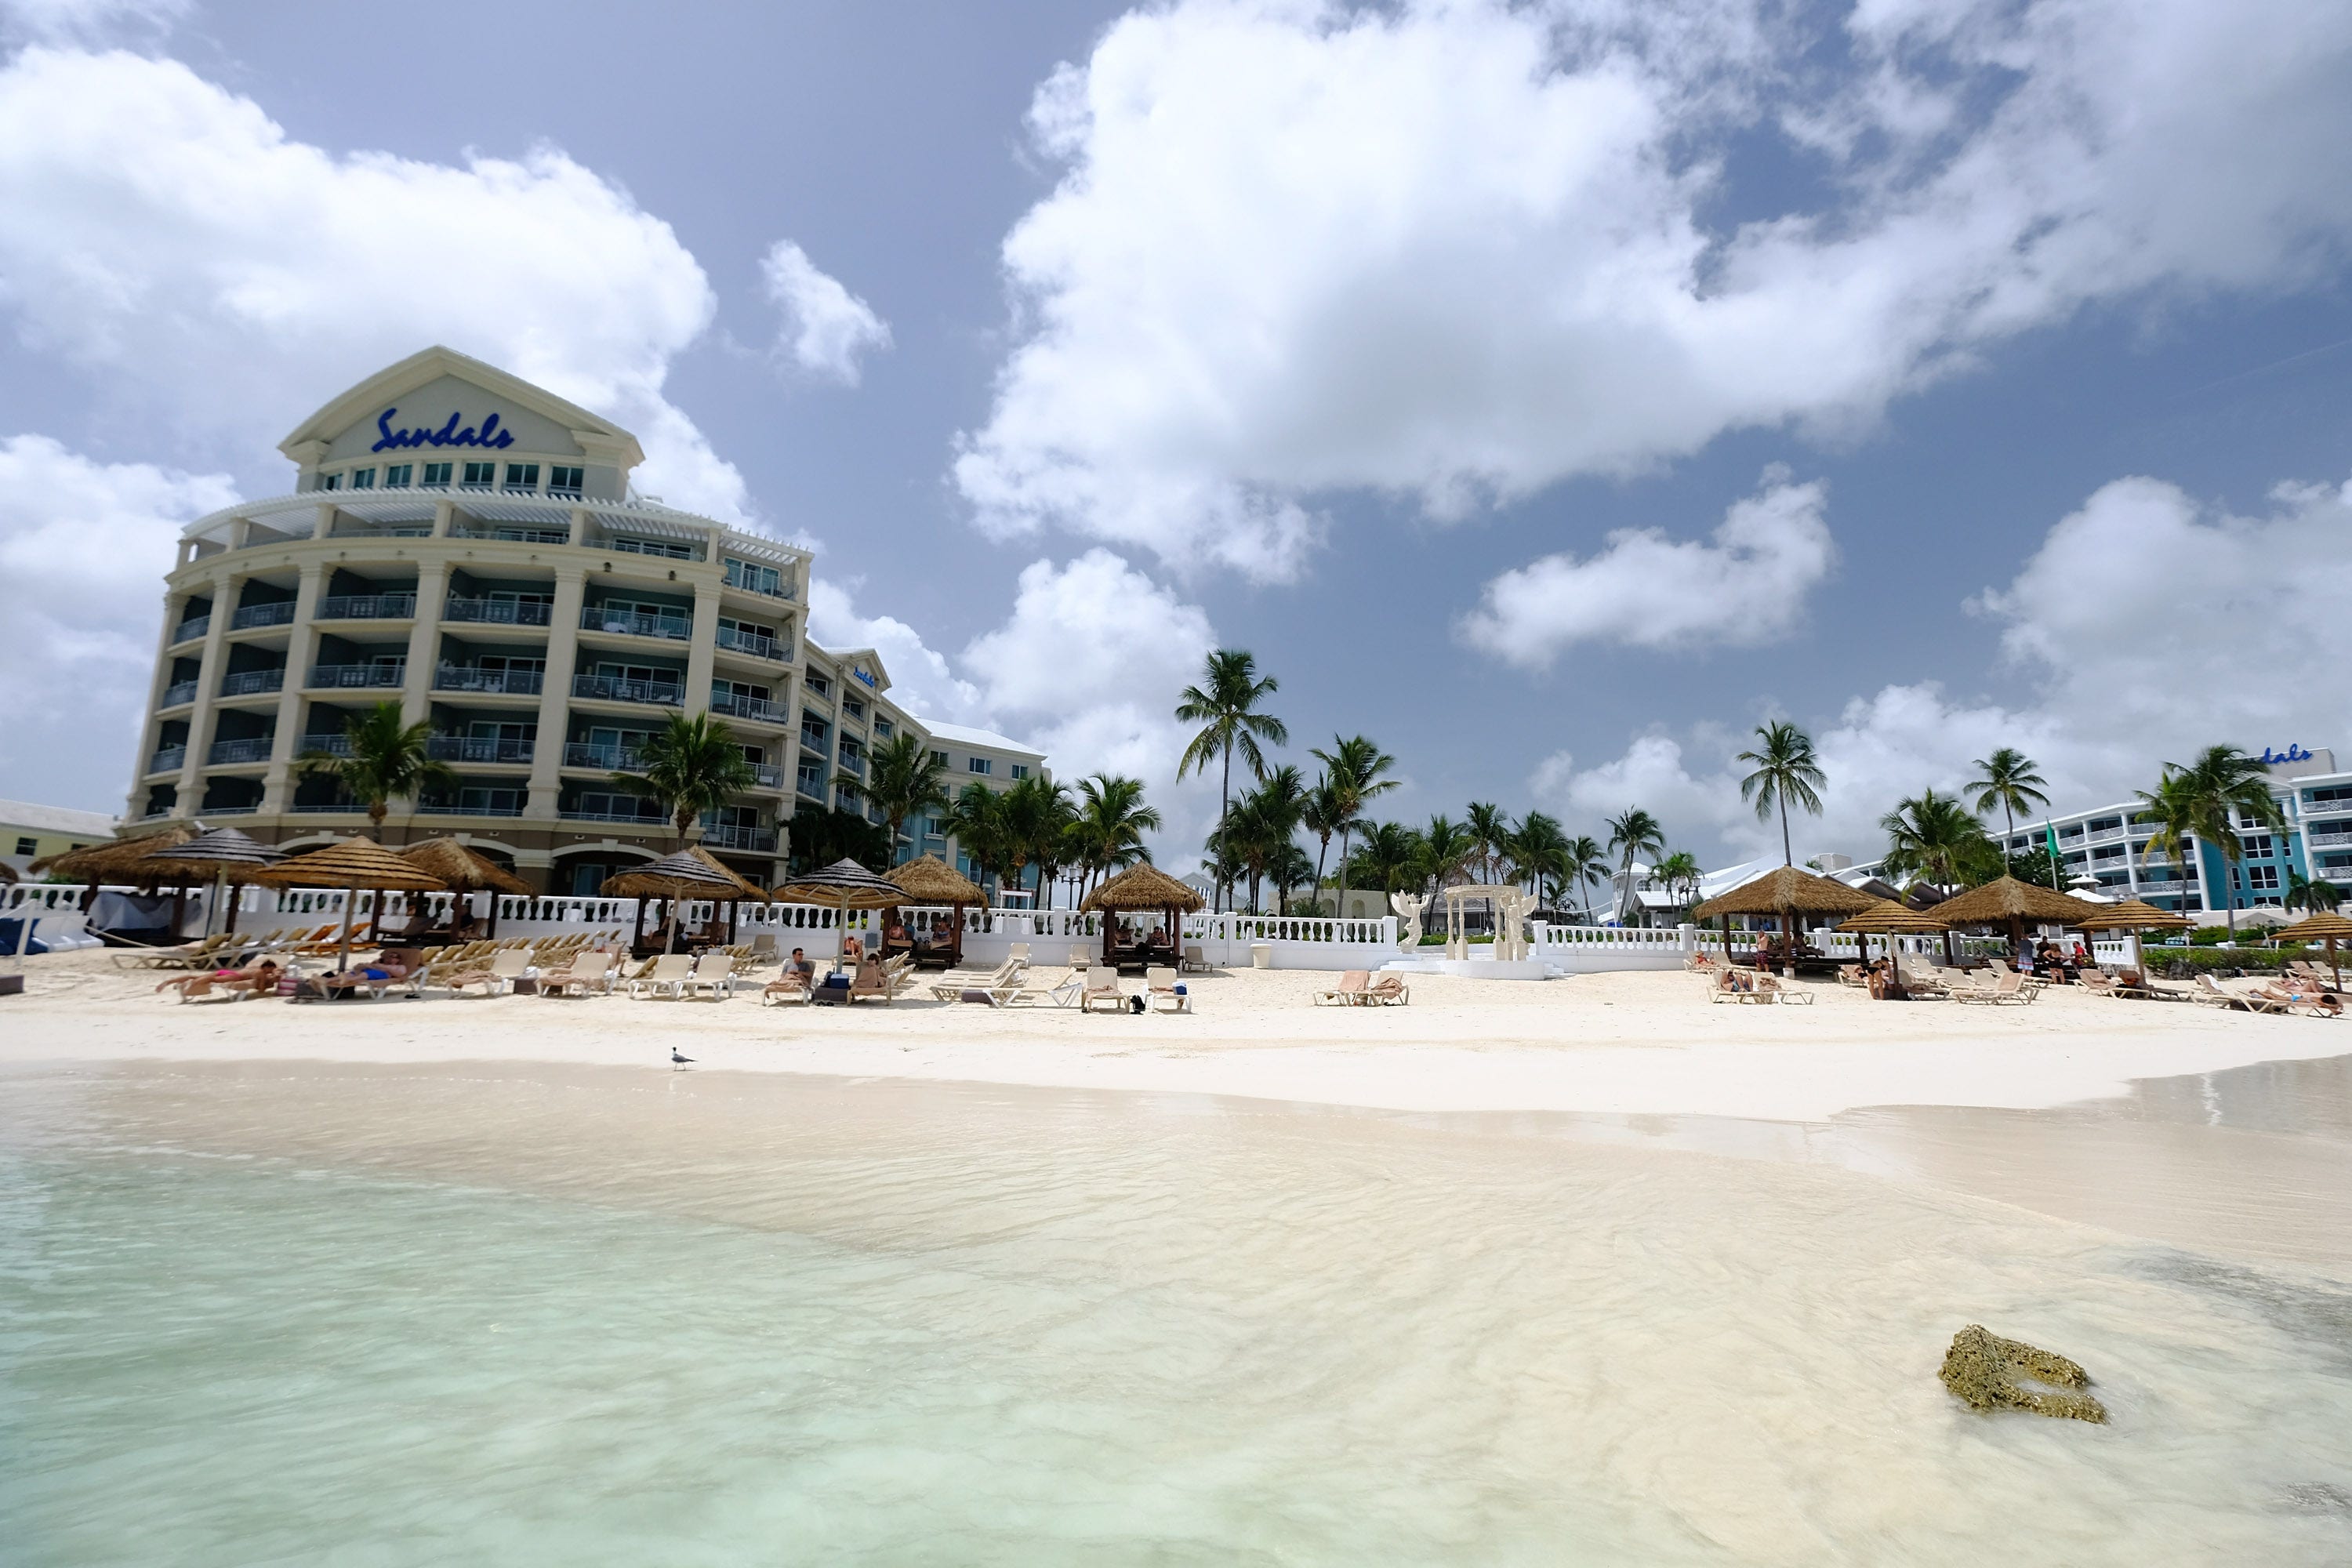 3 Americans at Bahamas Sandals resort found dead in unknown ‘health emergency’